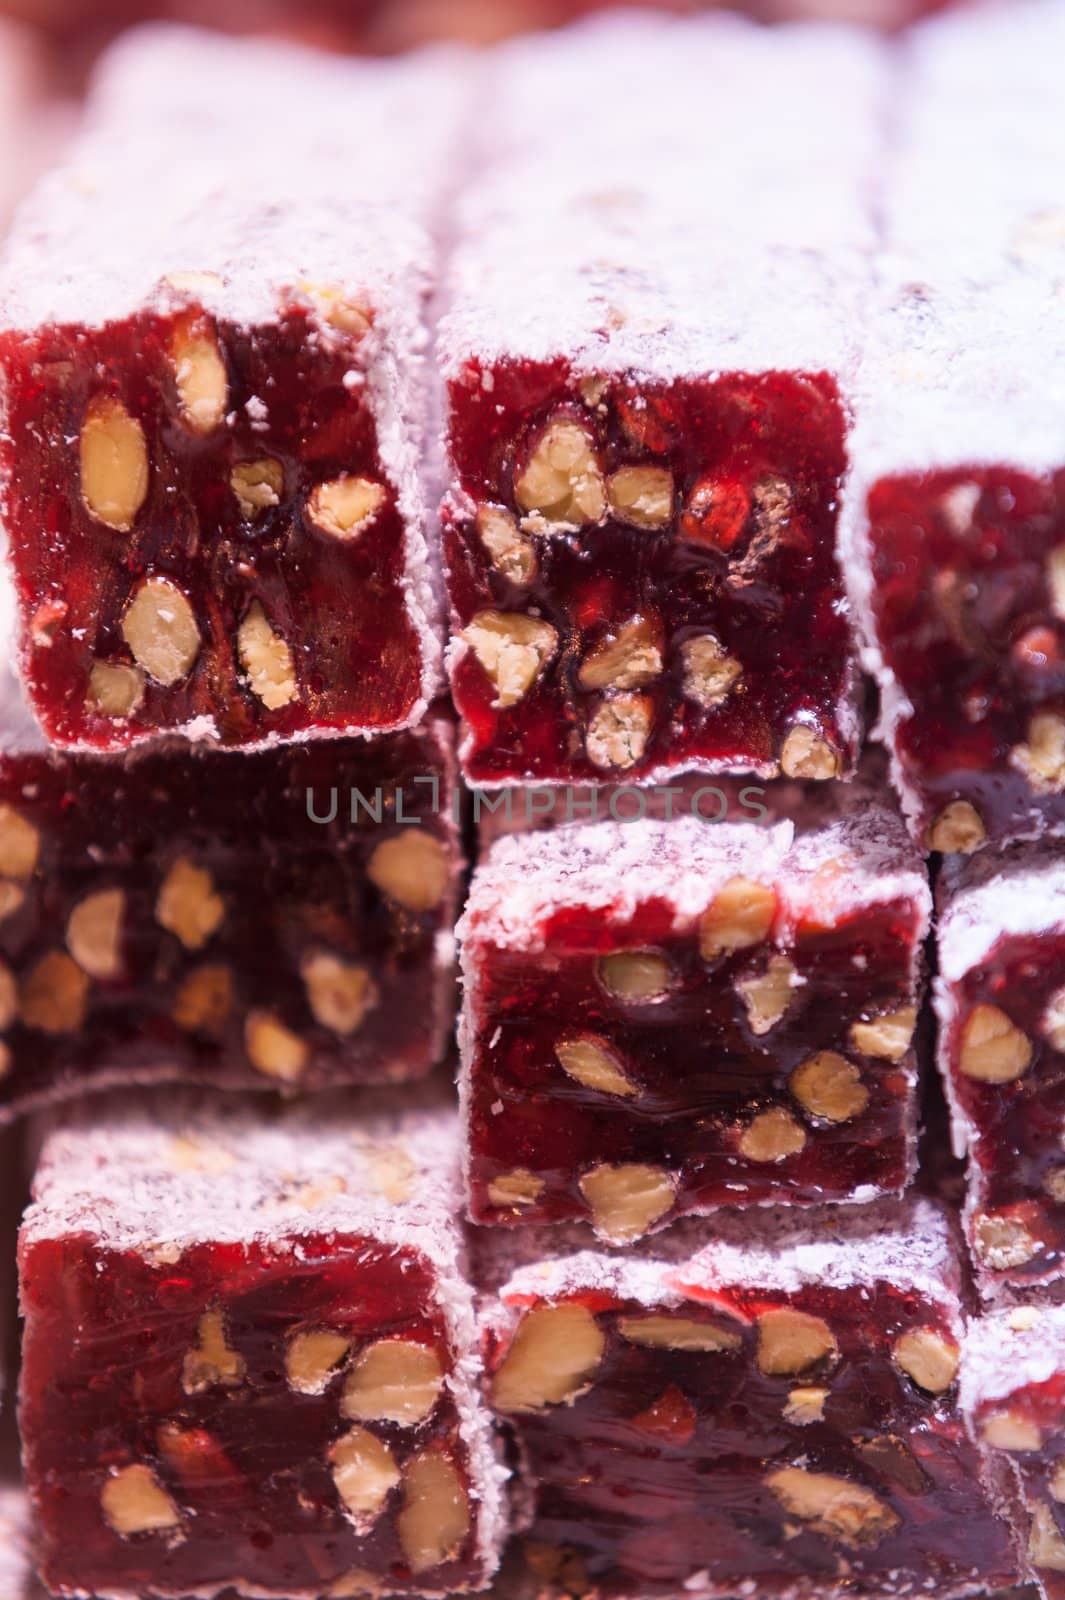 Sweet Turkish delight with pomegranate and nuts by oguzdkn